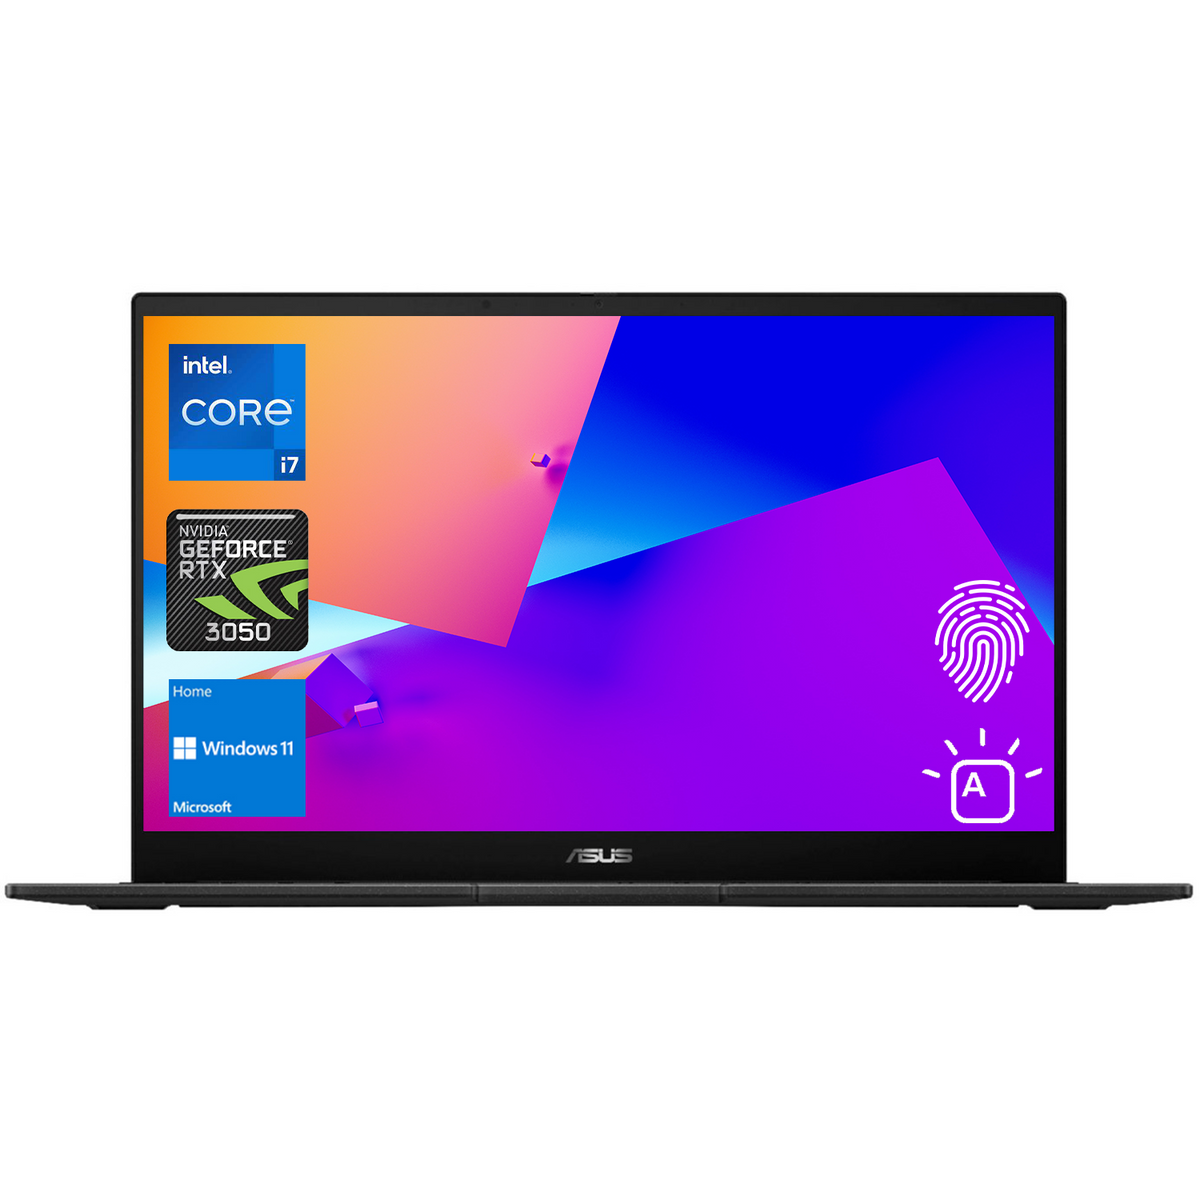 ASUS Creator 5 Daily Traditional Laptop, 15.6" FHD 1920*1080 Non-touch 60Hz, Intel Core i7-13620H, NVIDIA GeForce RTX 3050, 16GB DDR5 SODIMM, 512GB PCIe M.2 SSD, Wi-Fi 6, Windows 11 Home, Black